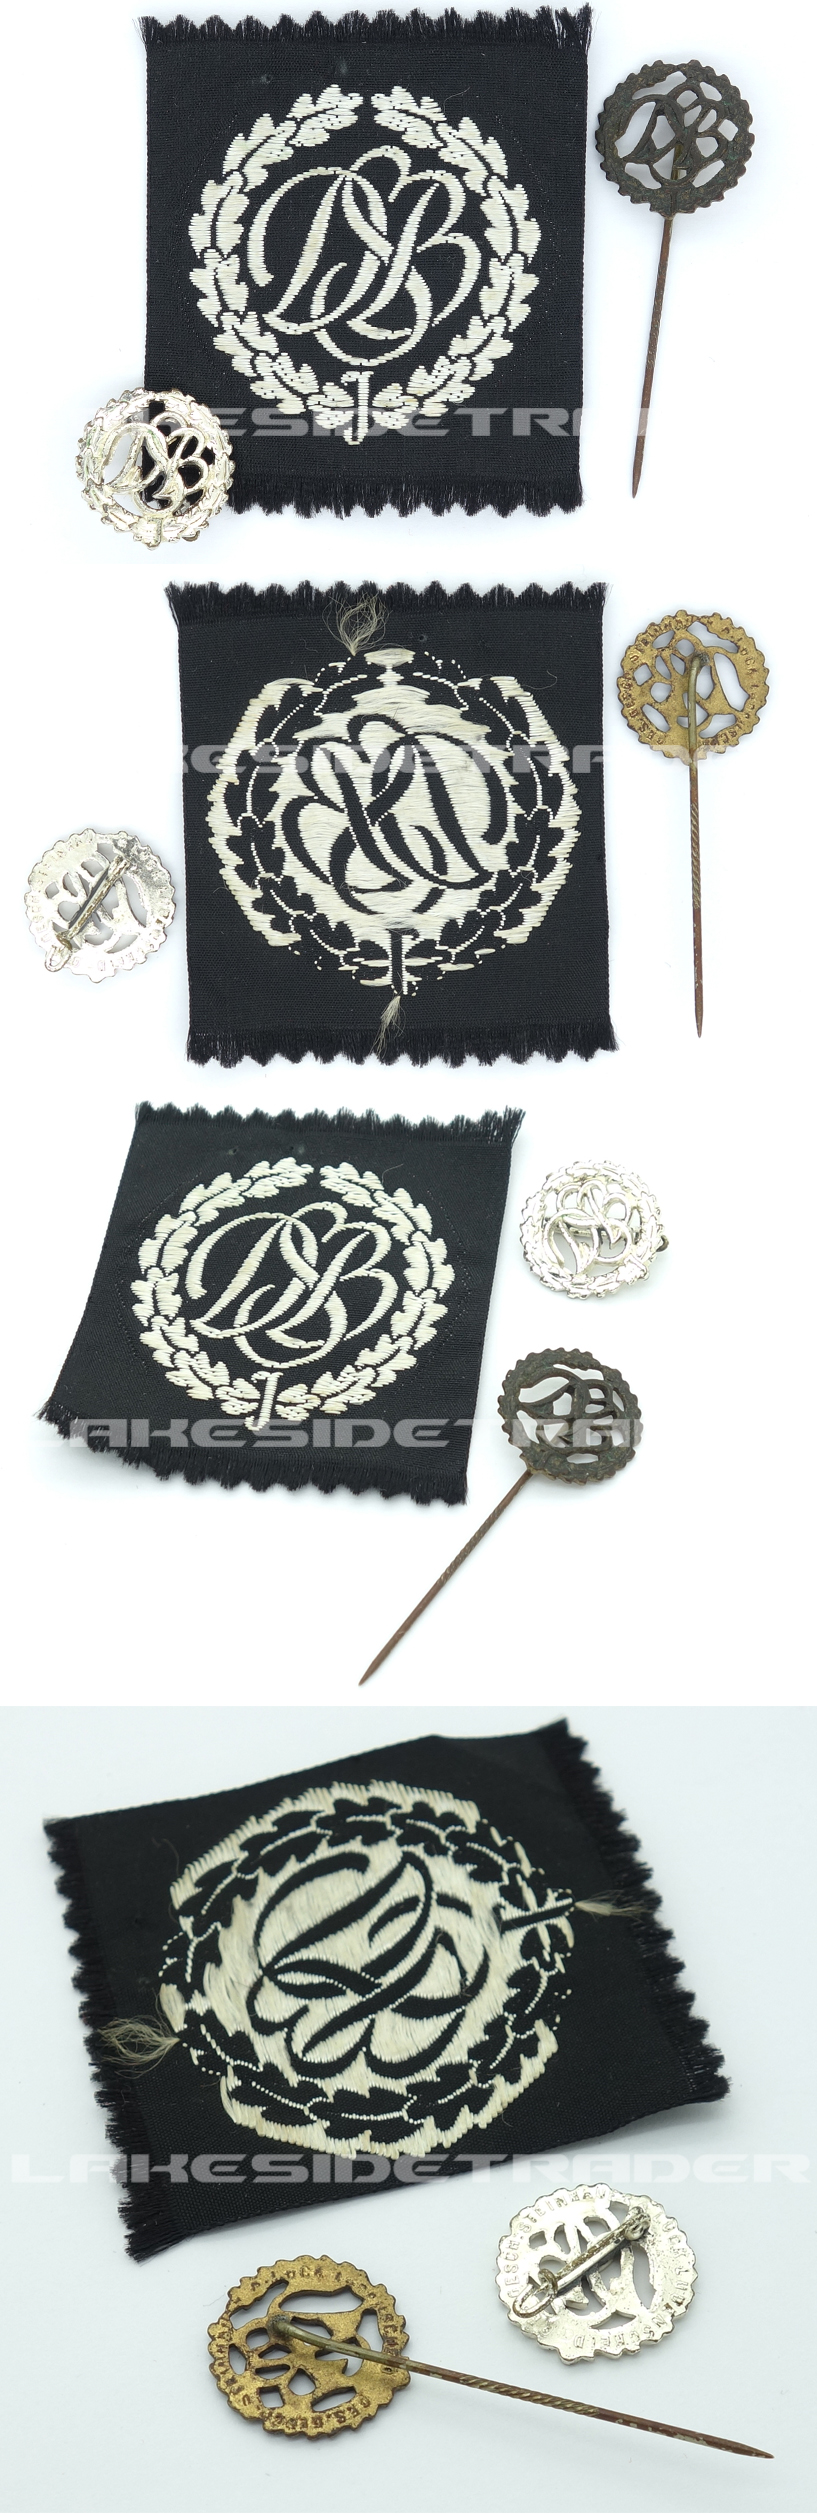 Three-Piece DSB Youth Badge Group